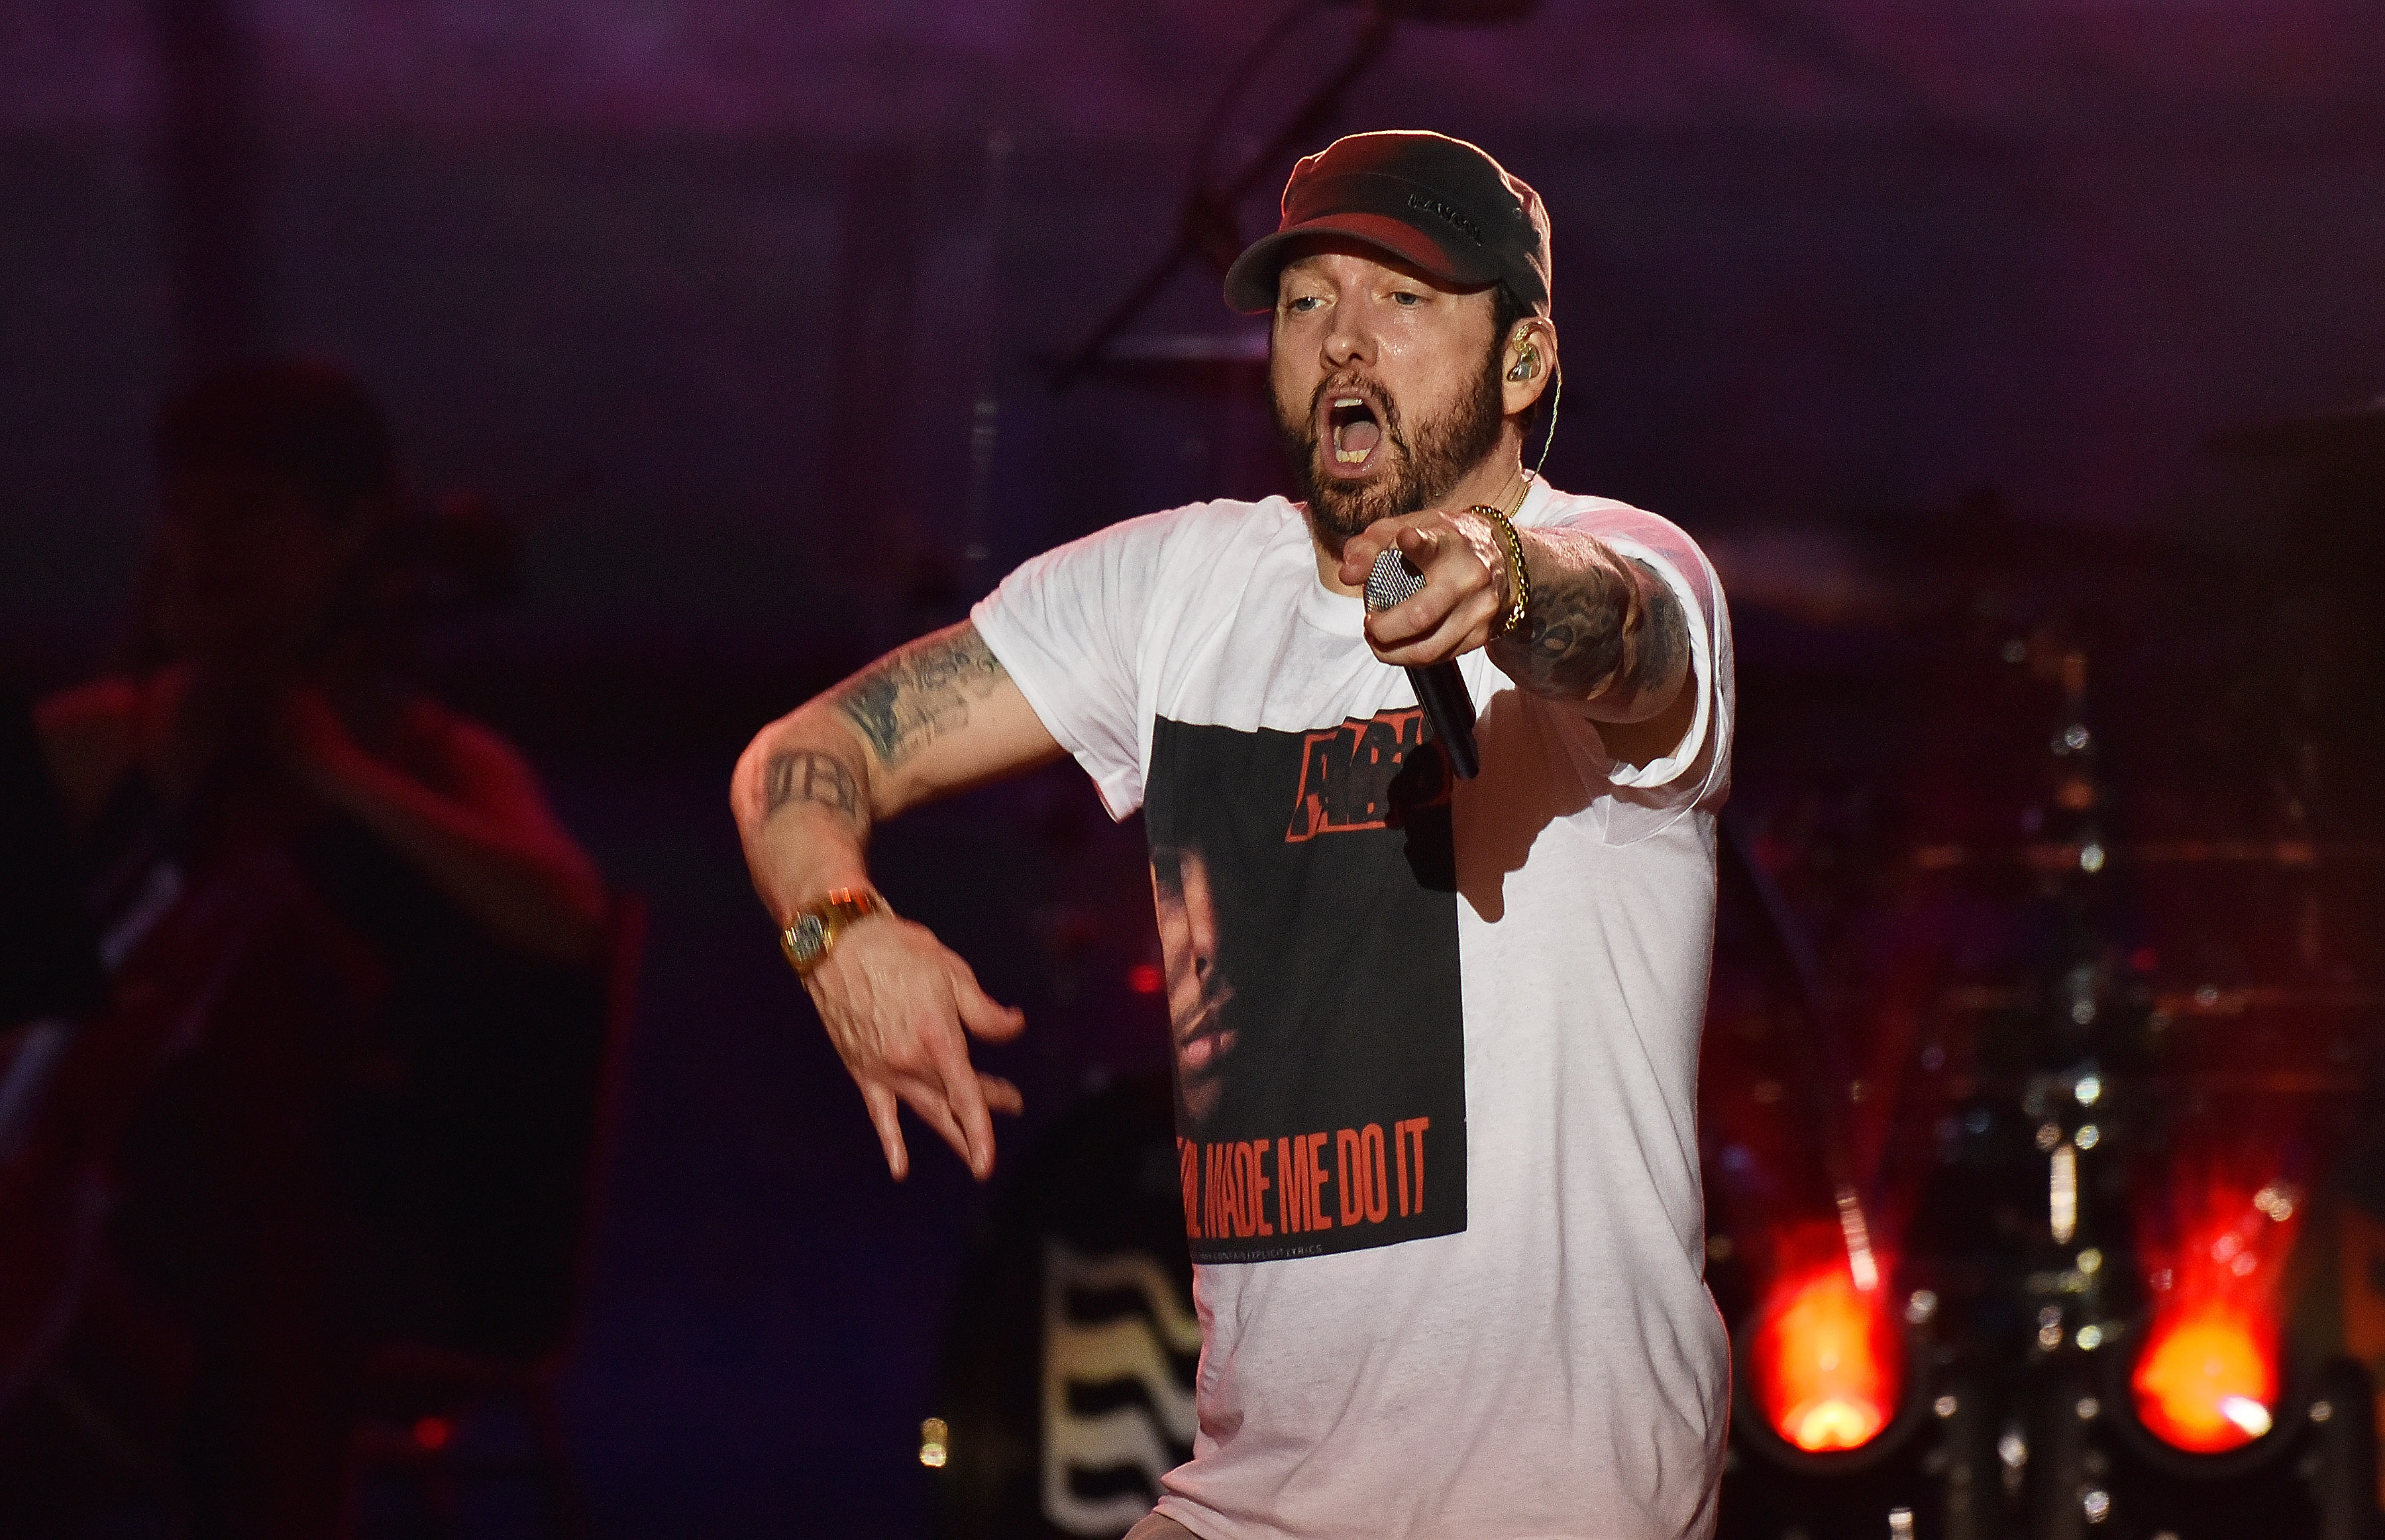 People Are Angry Eminem Used Gunshot Sound Effects At